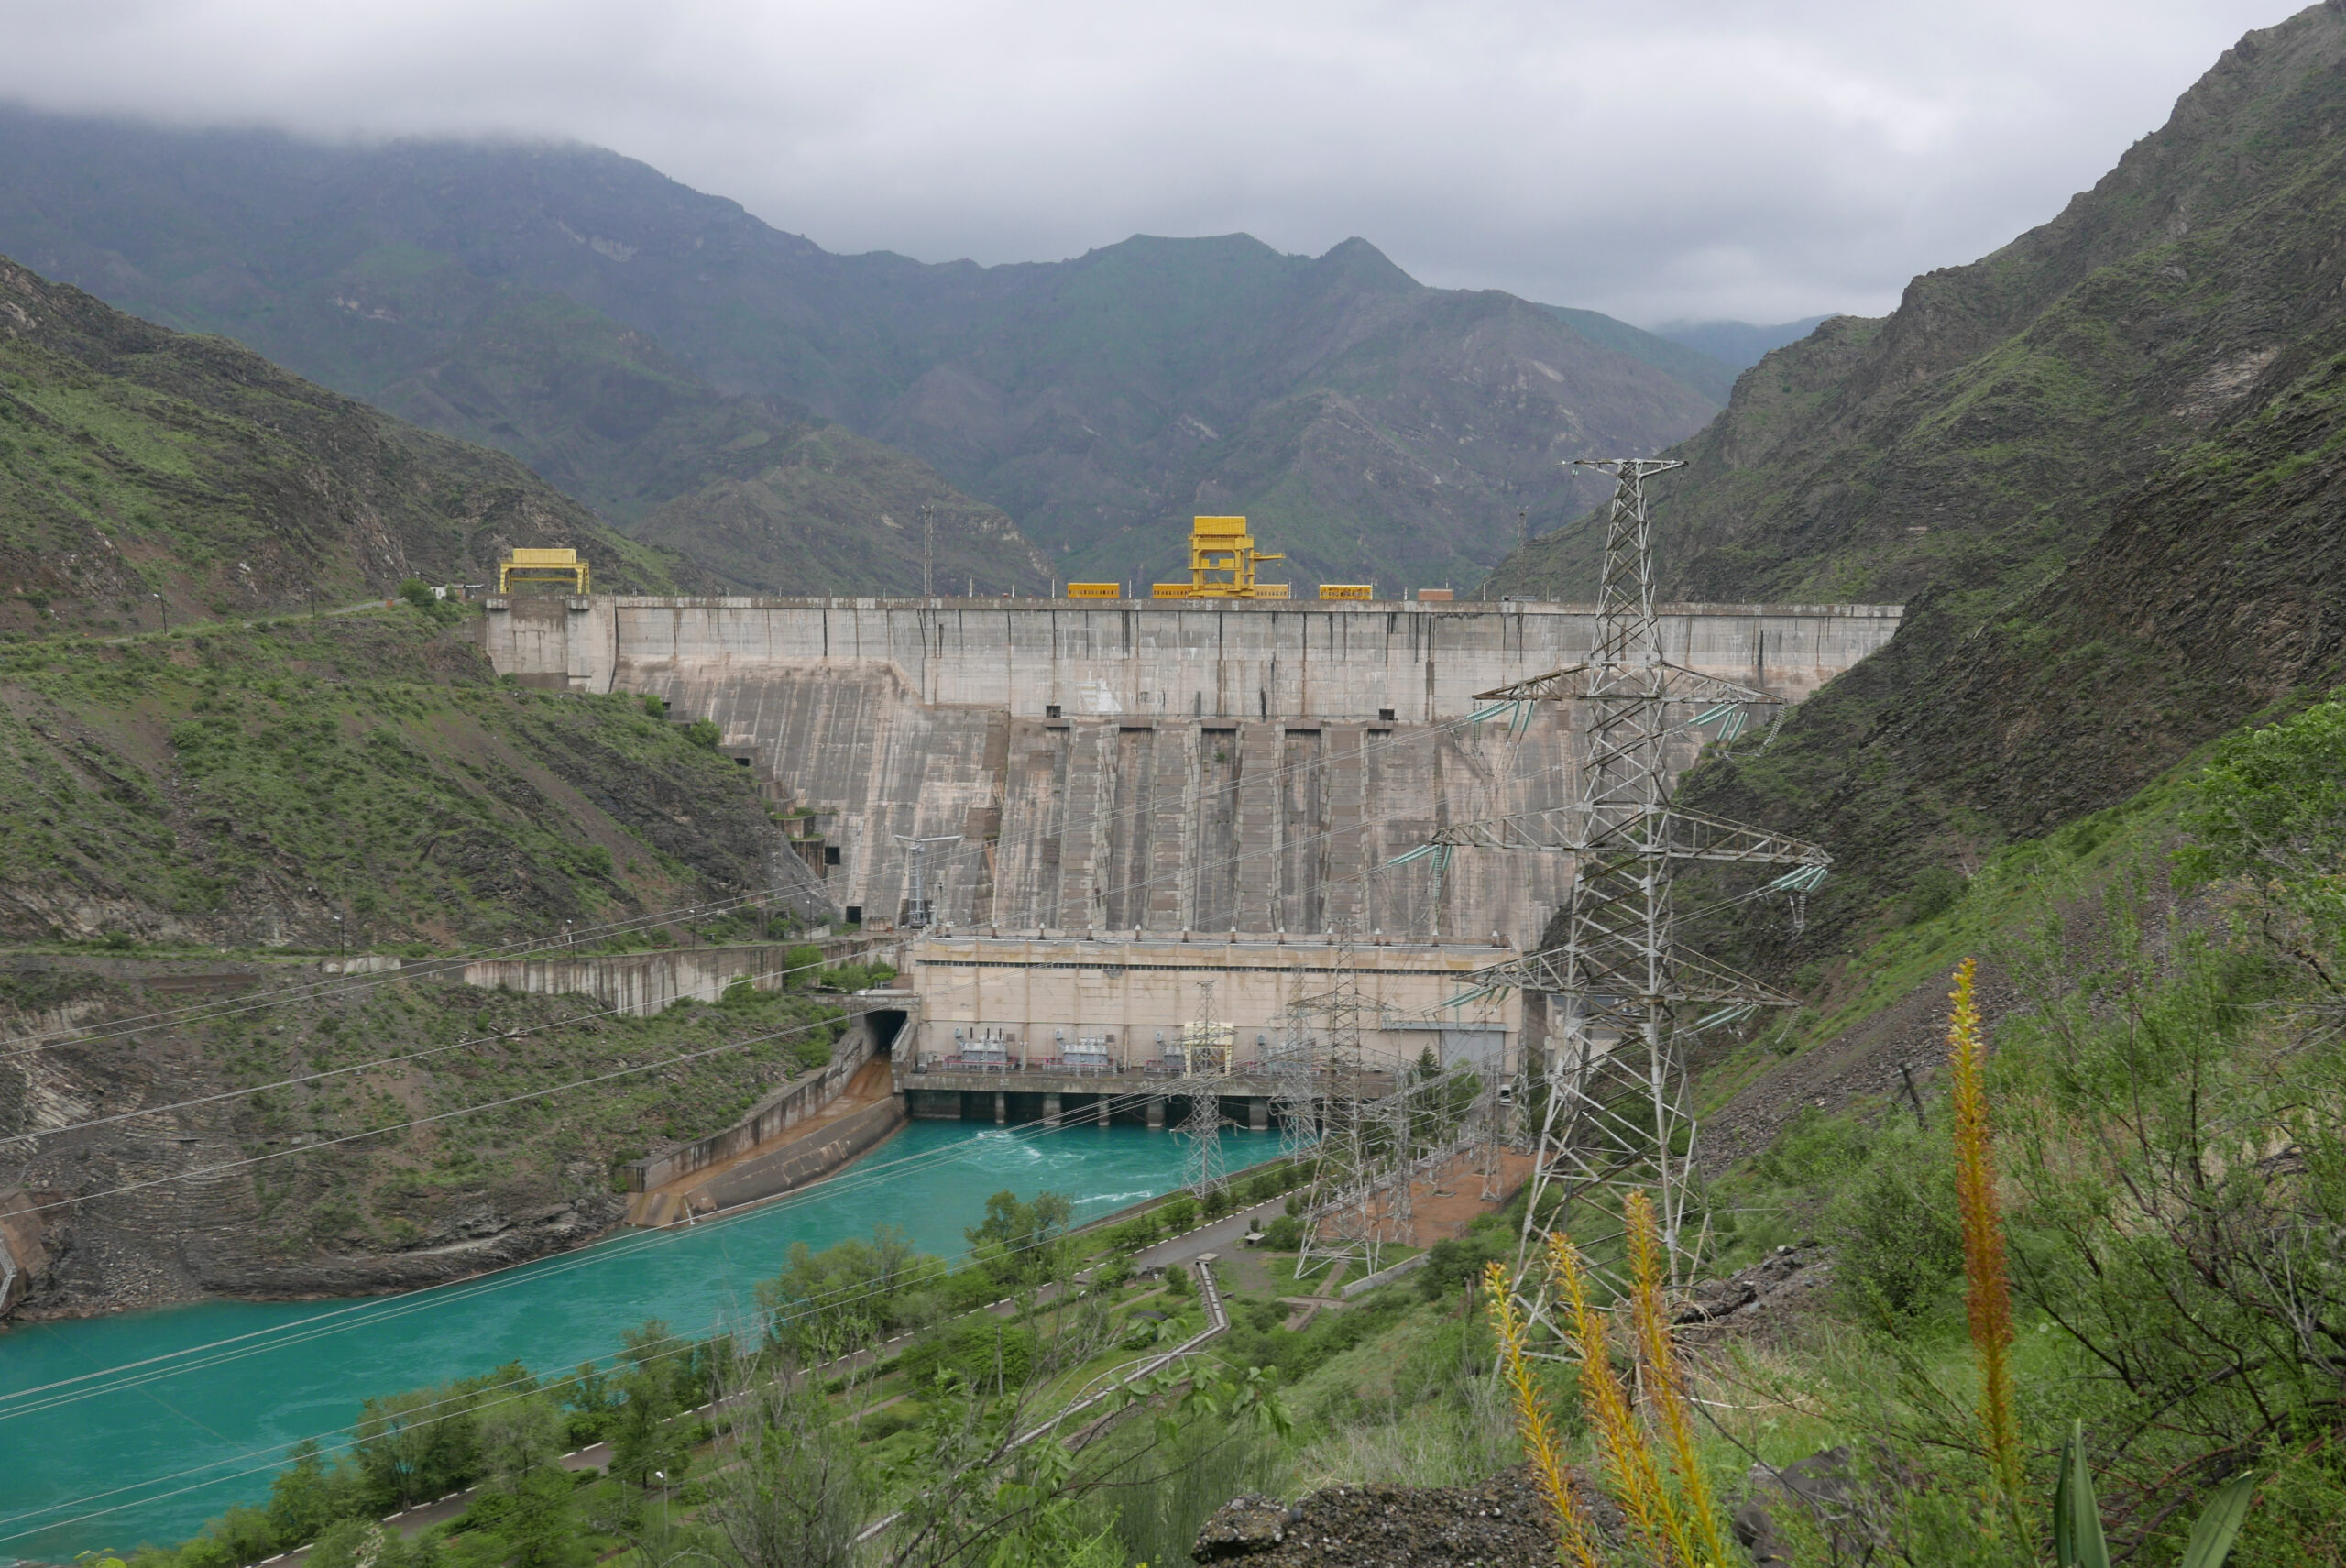 The Kurpsai hydroelectric dam in Kyrgyzstan - a large concorete damn set in mountains with a bright green river running from the bottom of the damn